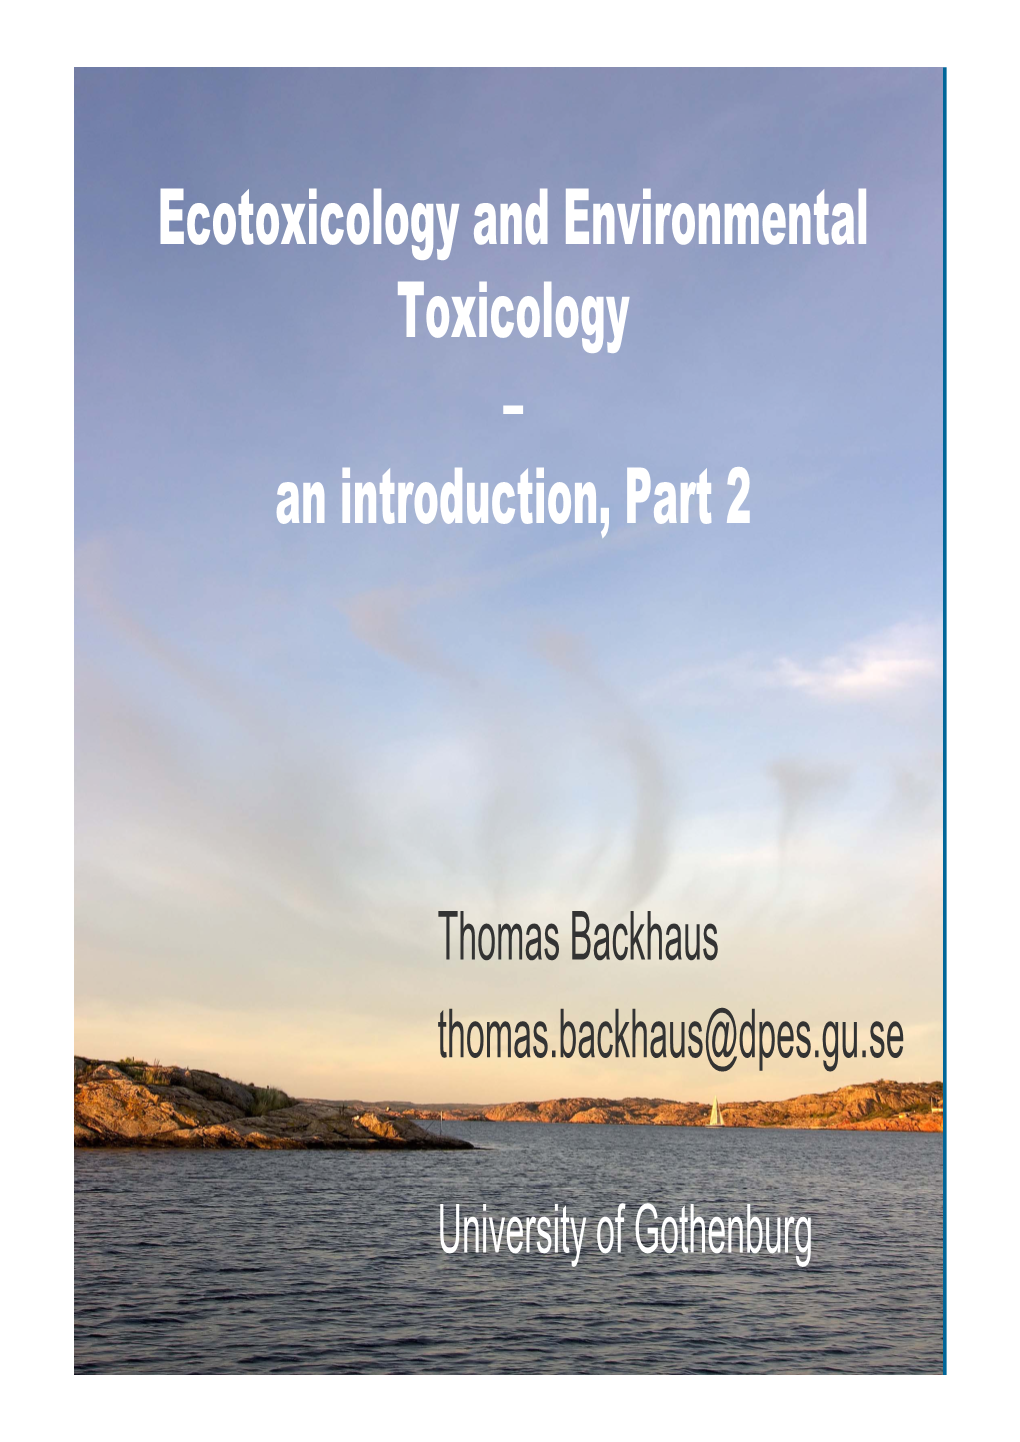 Ecotoxicology and Environmental Toxicology – an Introduction, Part 2